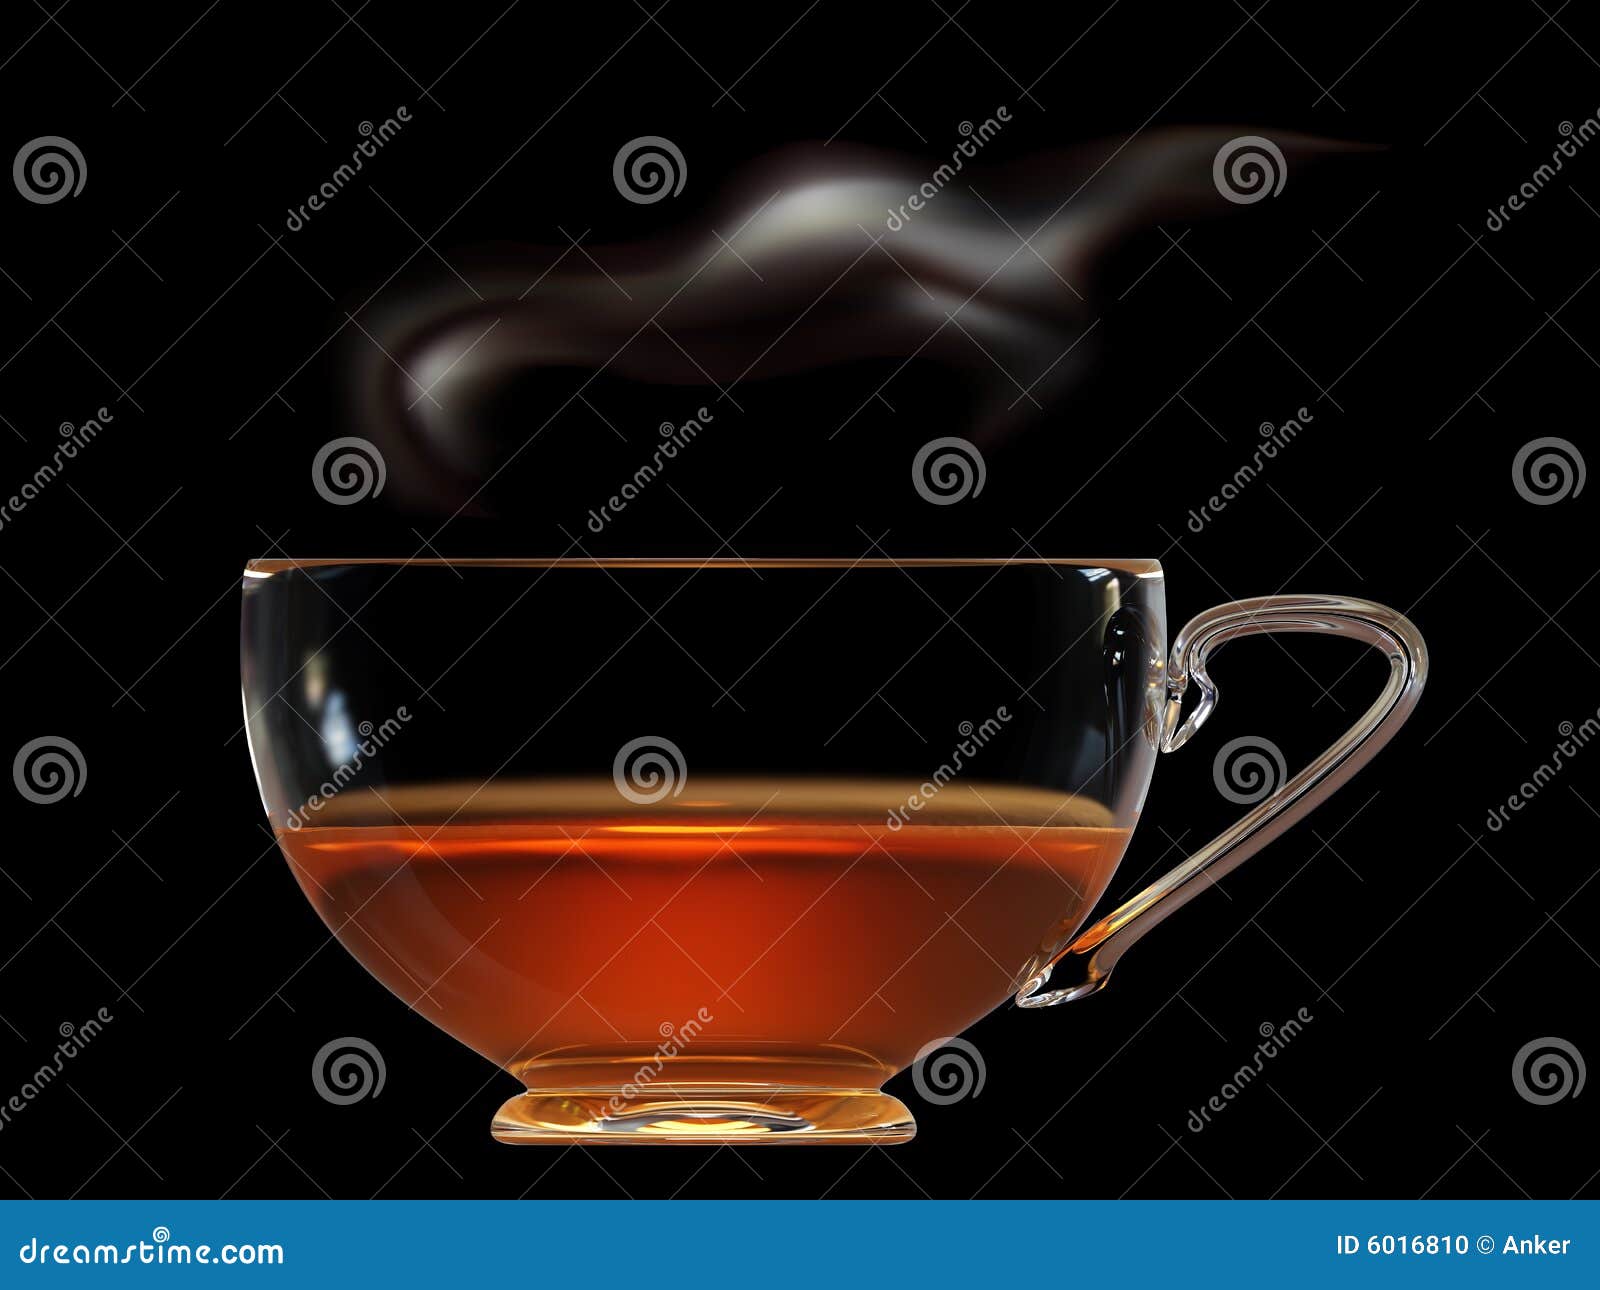 Mug With Tea And Steam In A Flat Style Vector Clipart Stock Illustration -  Download Image Now - iStock